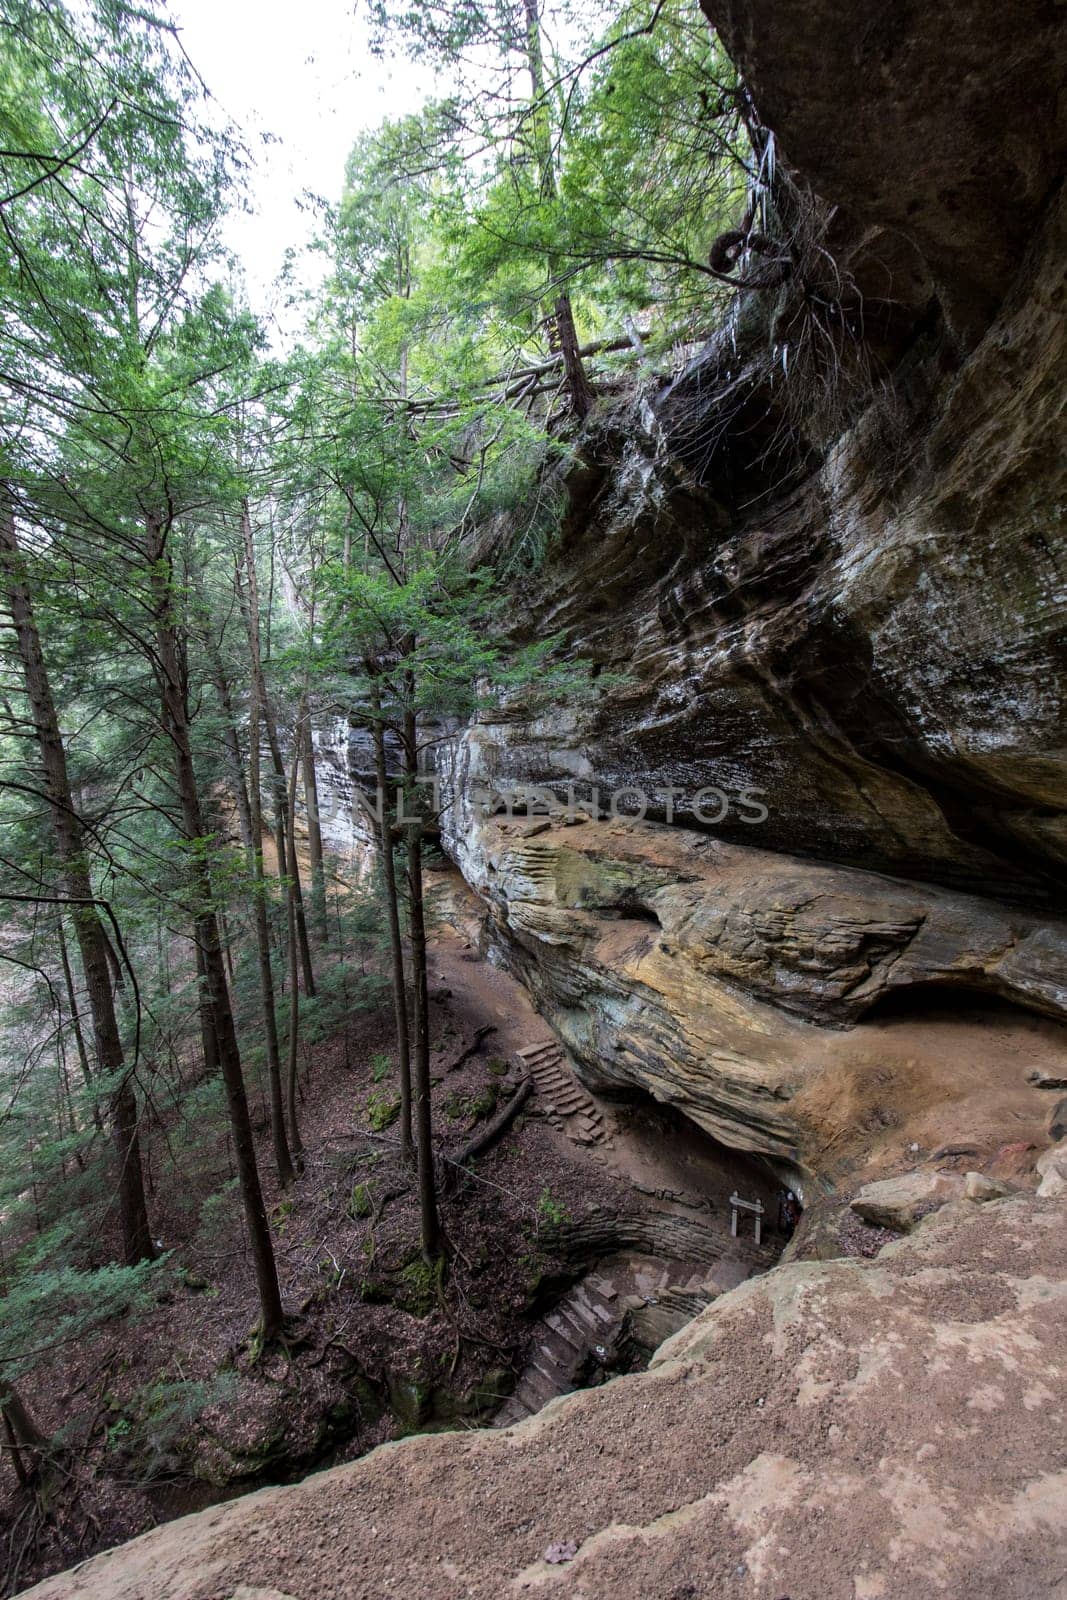 Views at Old Man's Cave, Hocking Hills State Park, Ohio